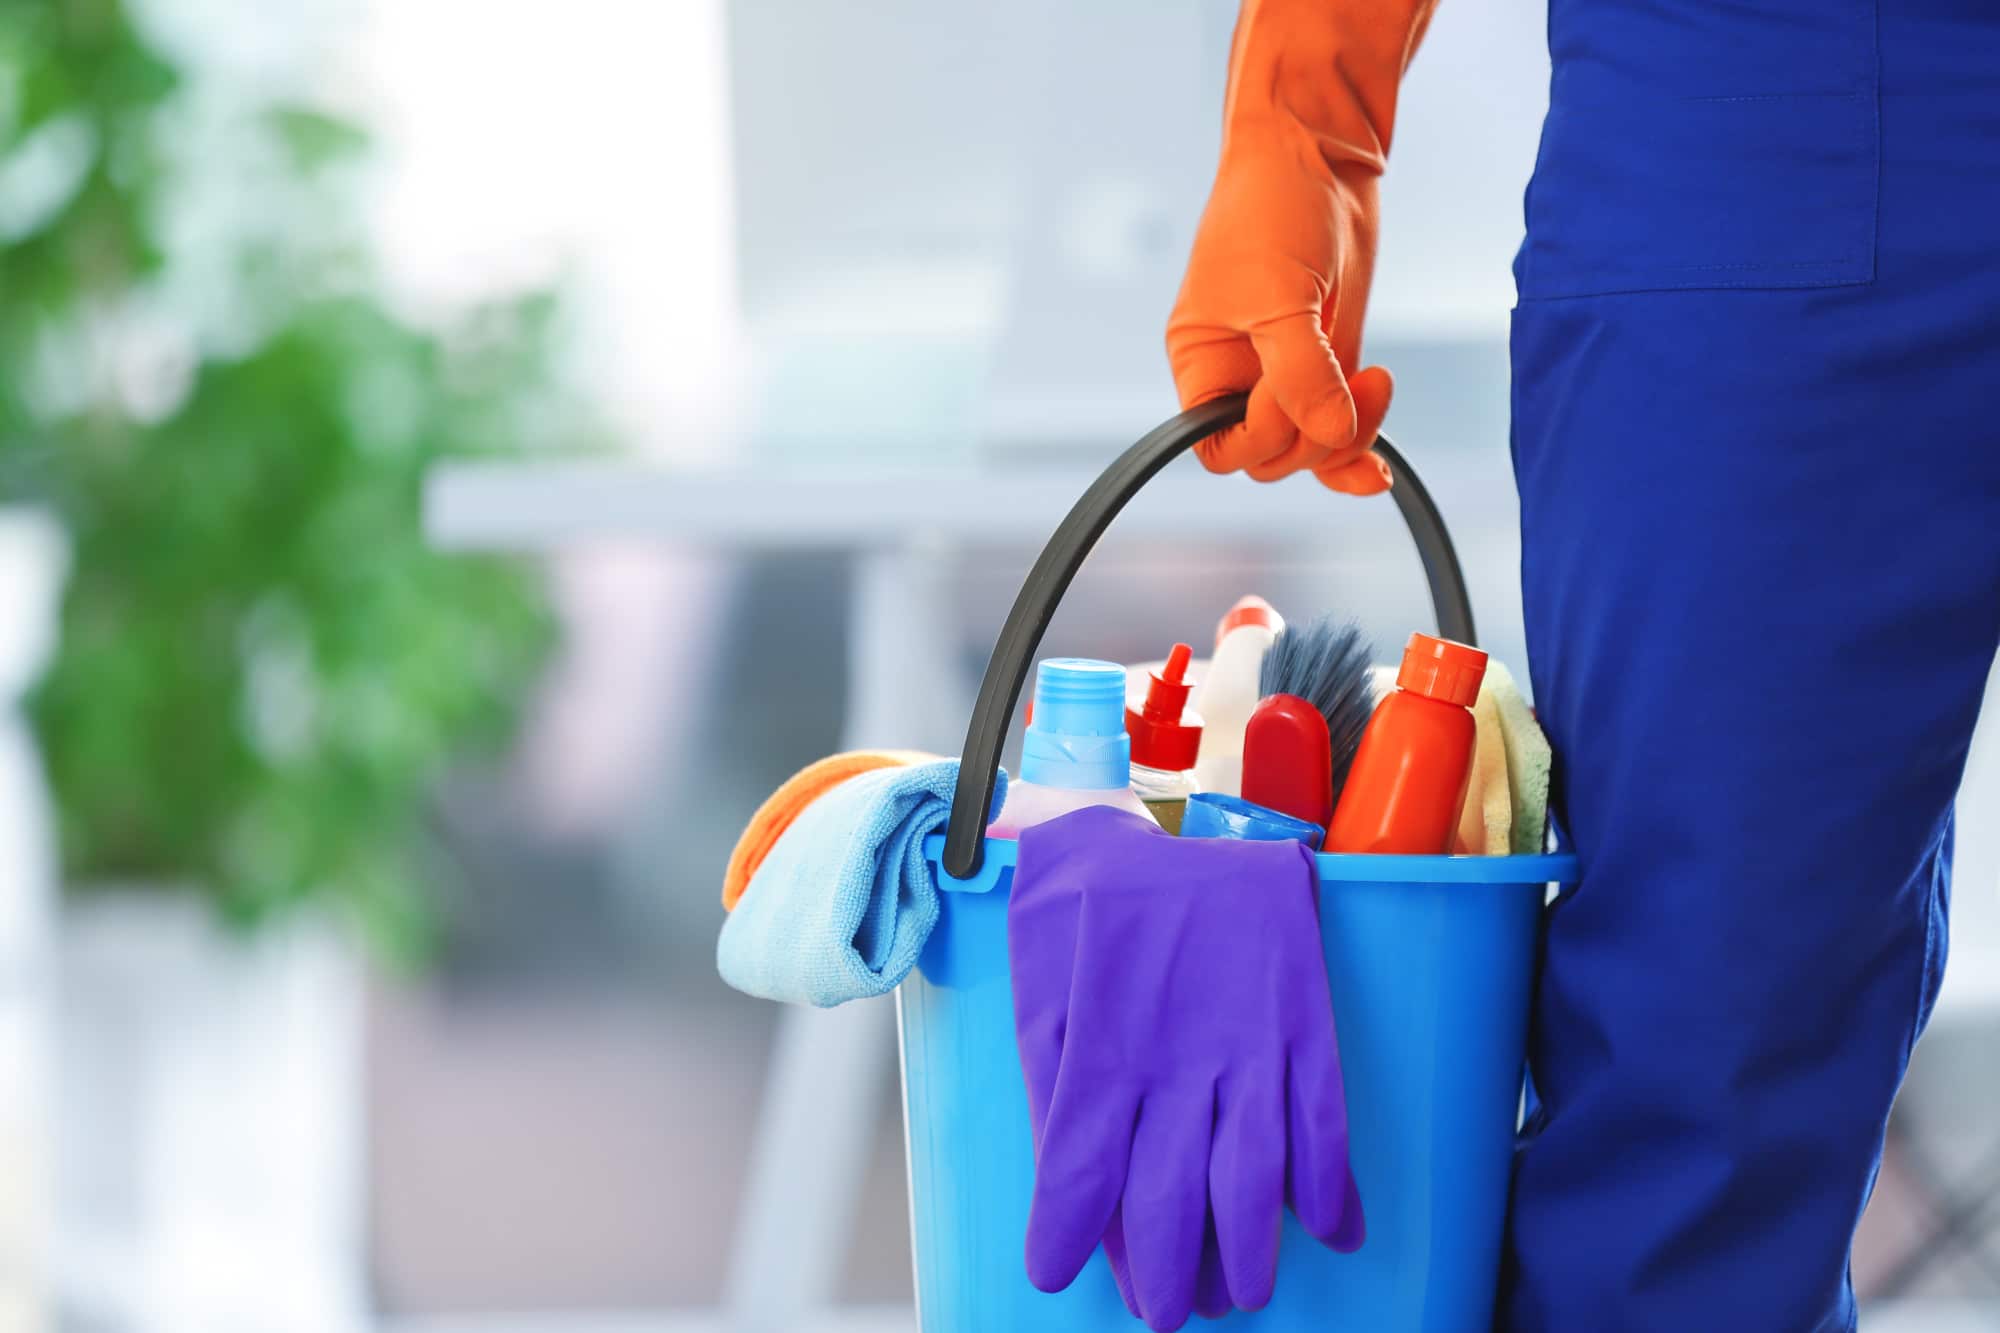 Top 10 Benefits of Hiring a Professional House Cleaner - Top 10 Benefits of  Hiring a Professional House Cleaner